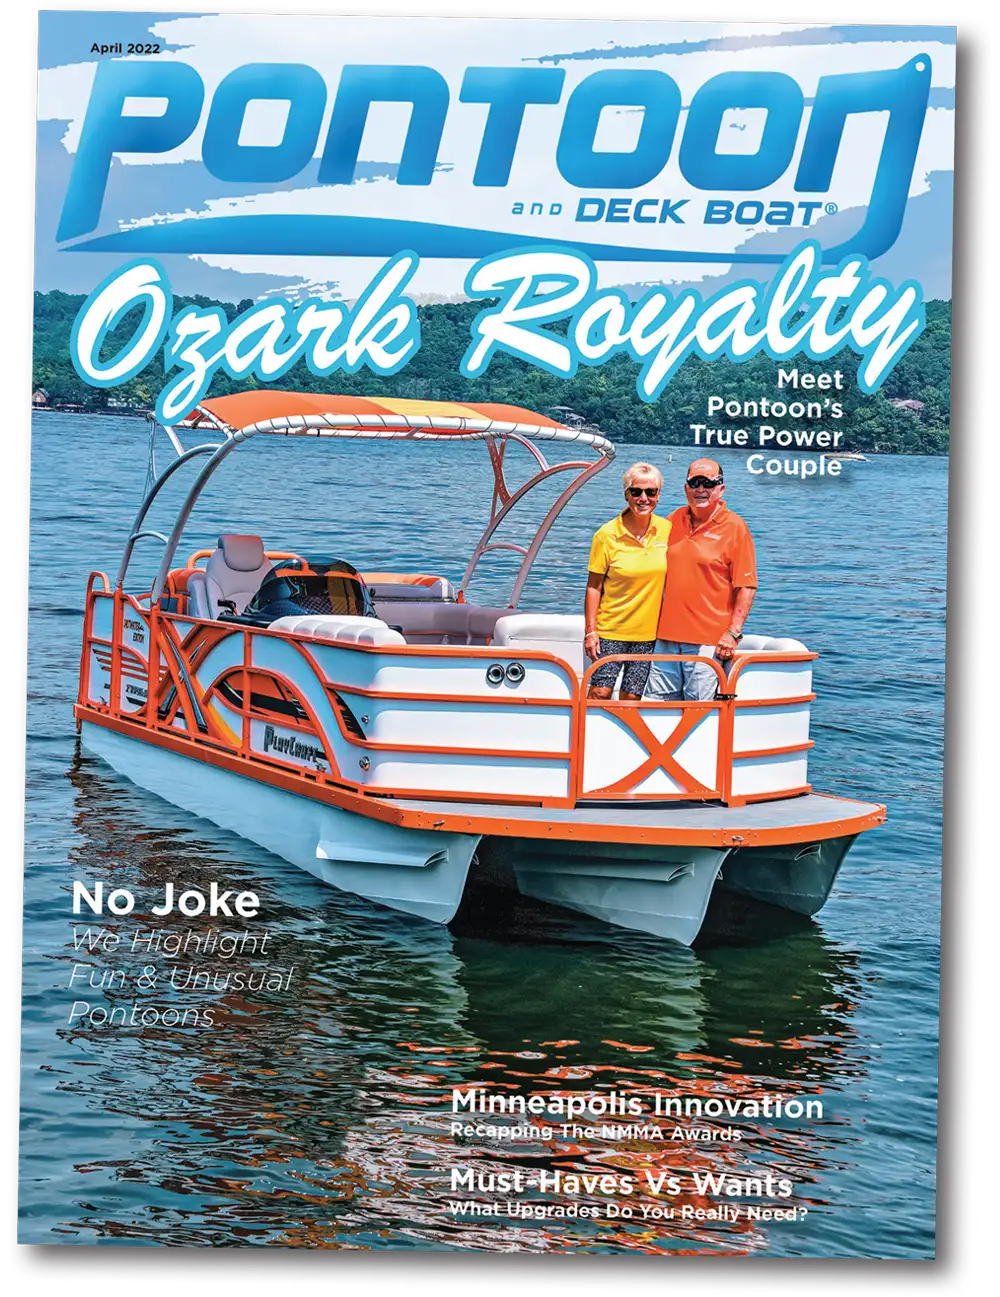 Jim Dorris and his wife Carolyn on the cover of the April 2022 issue of Pontoon and Deck Boat